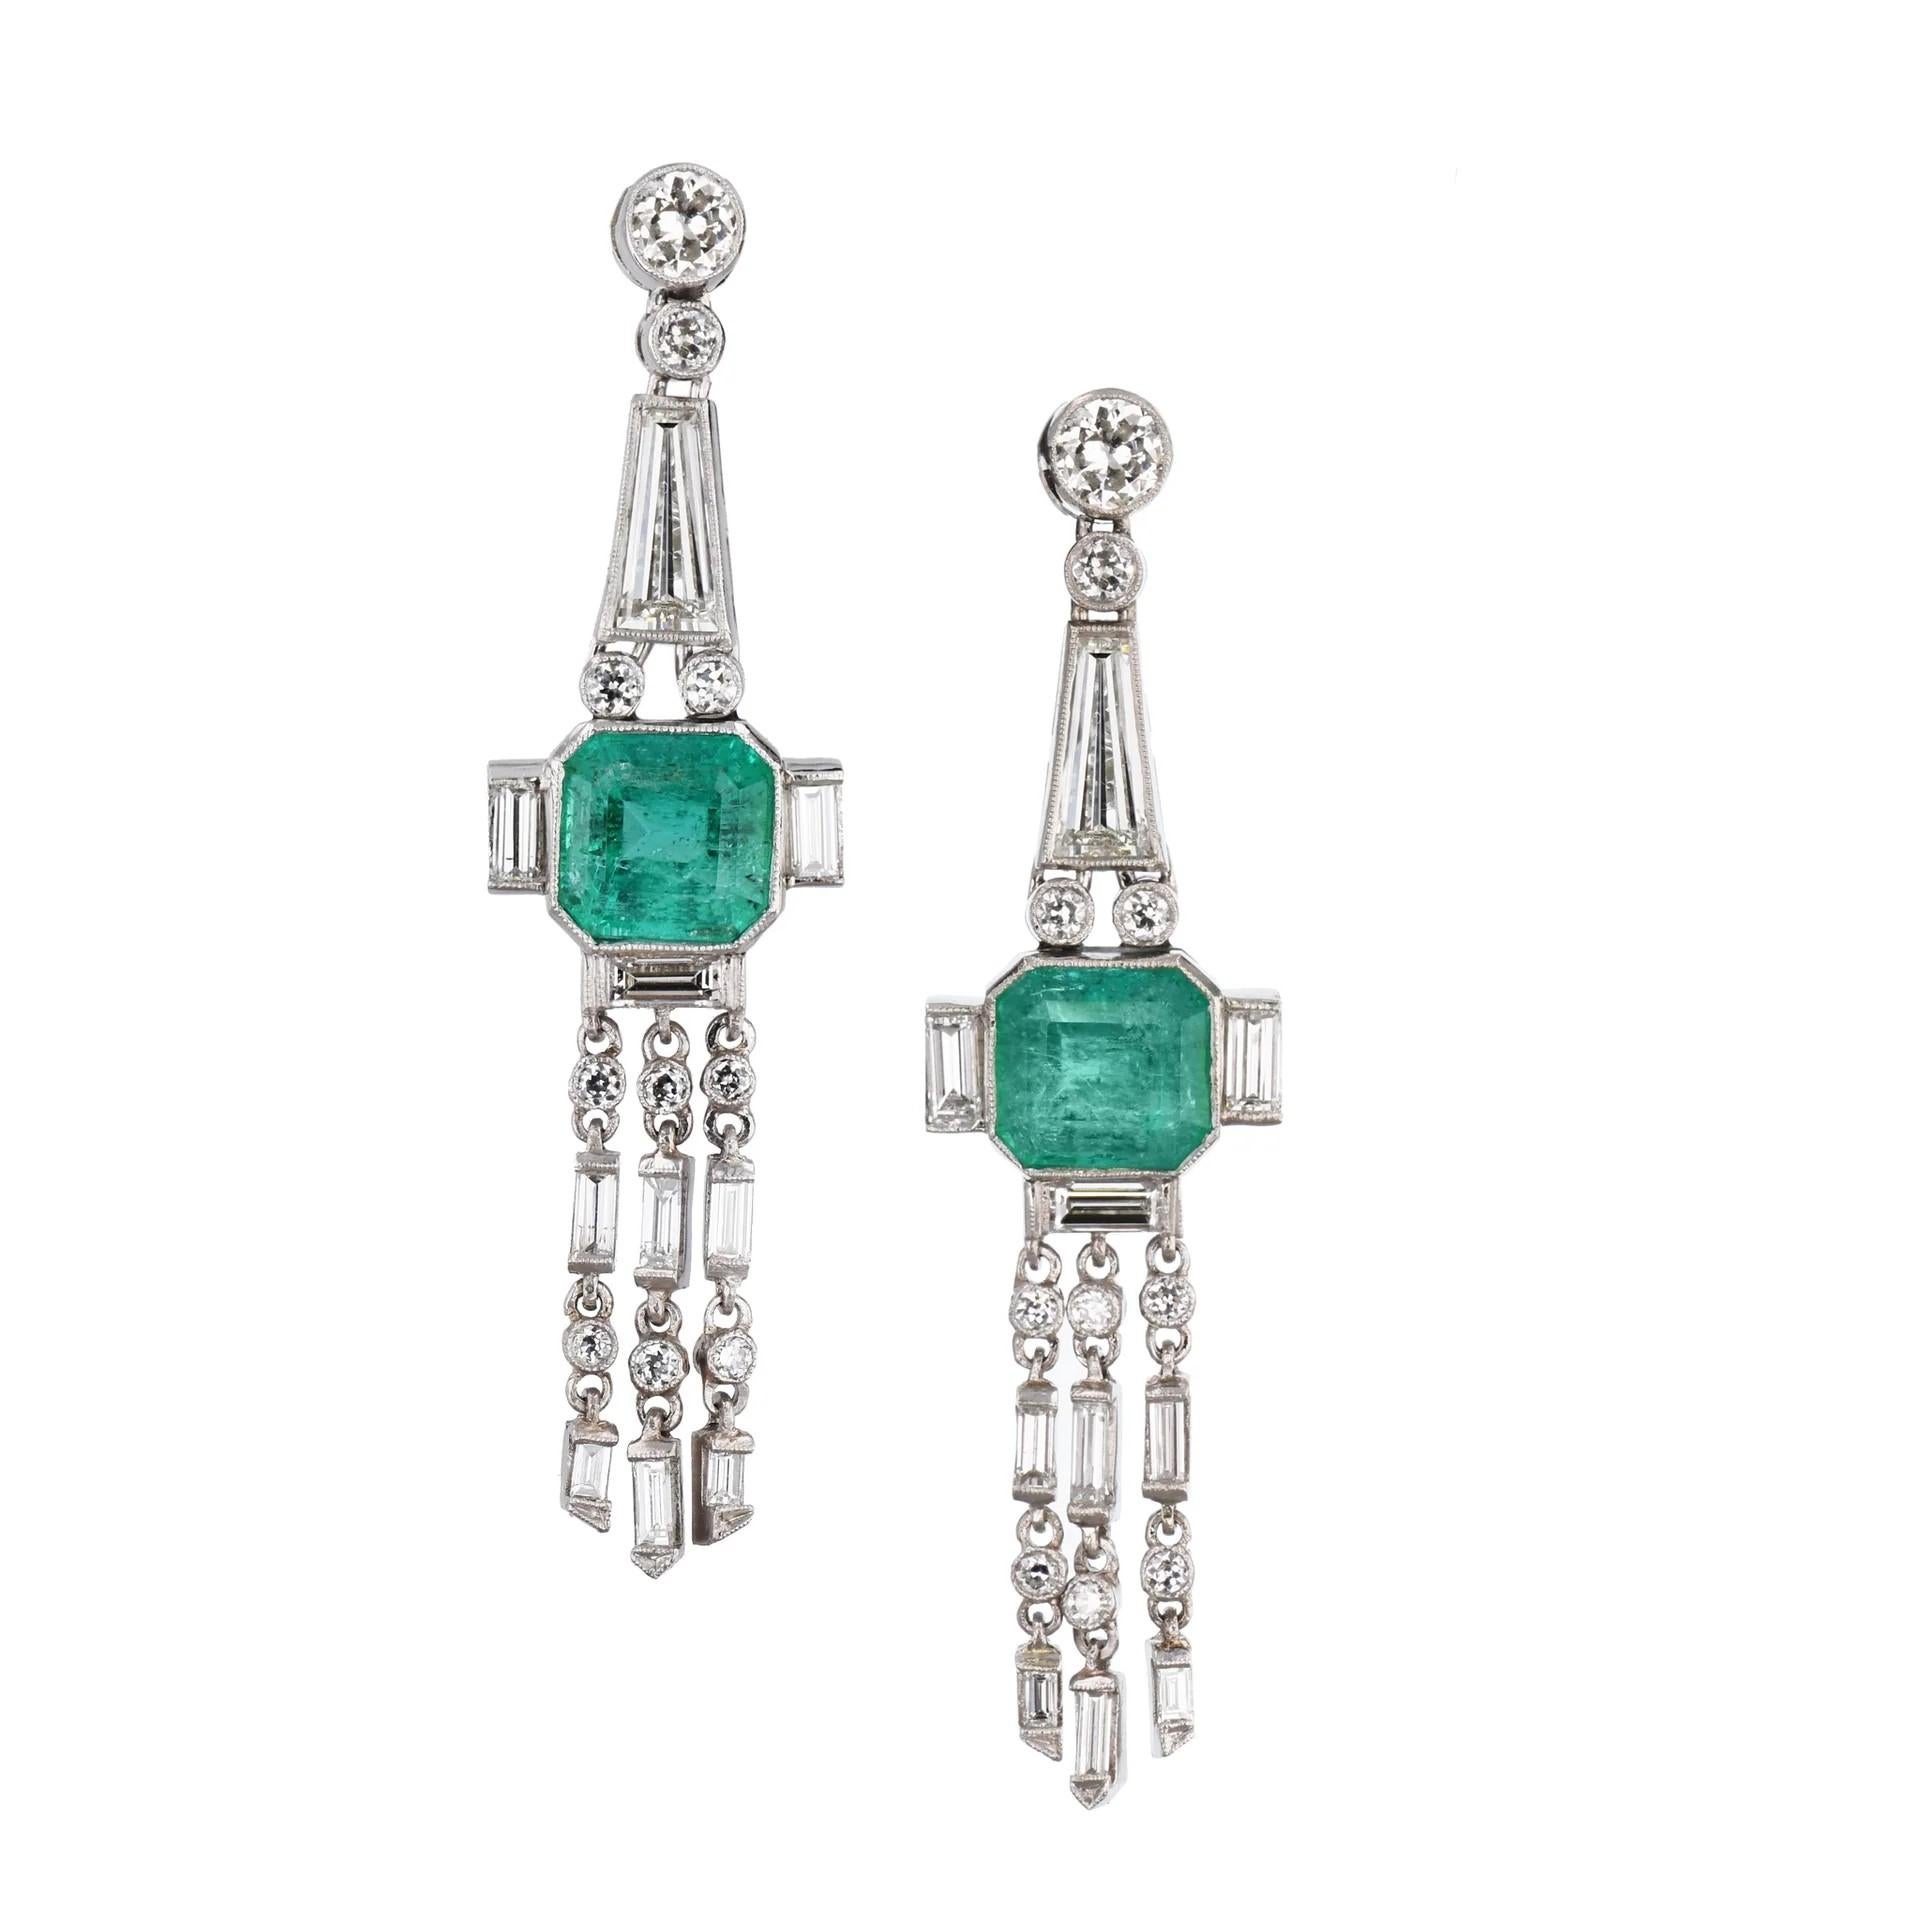 These authentic art deco emerald earrings have been created platinum and will turn heads!

These platinum drop earring are embellished with stunning emeralds & diamonds, so you will sparkle like never before.

There are an approximate total of 4.00